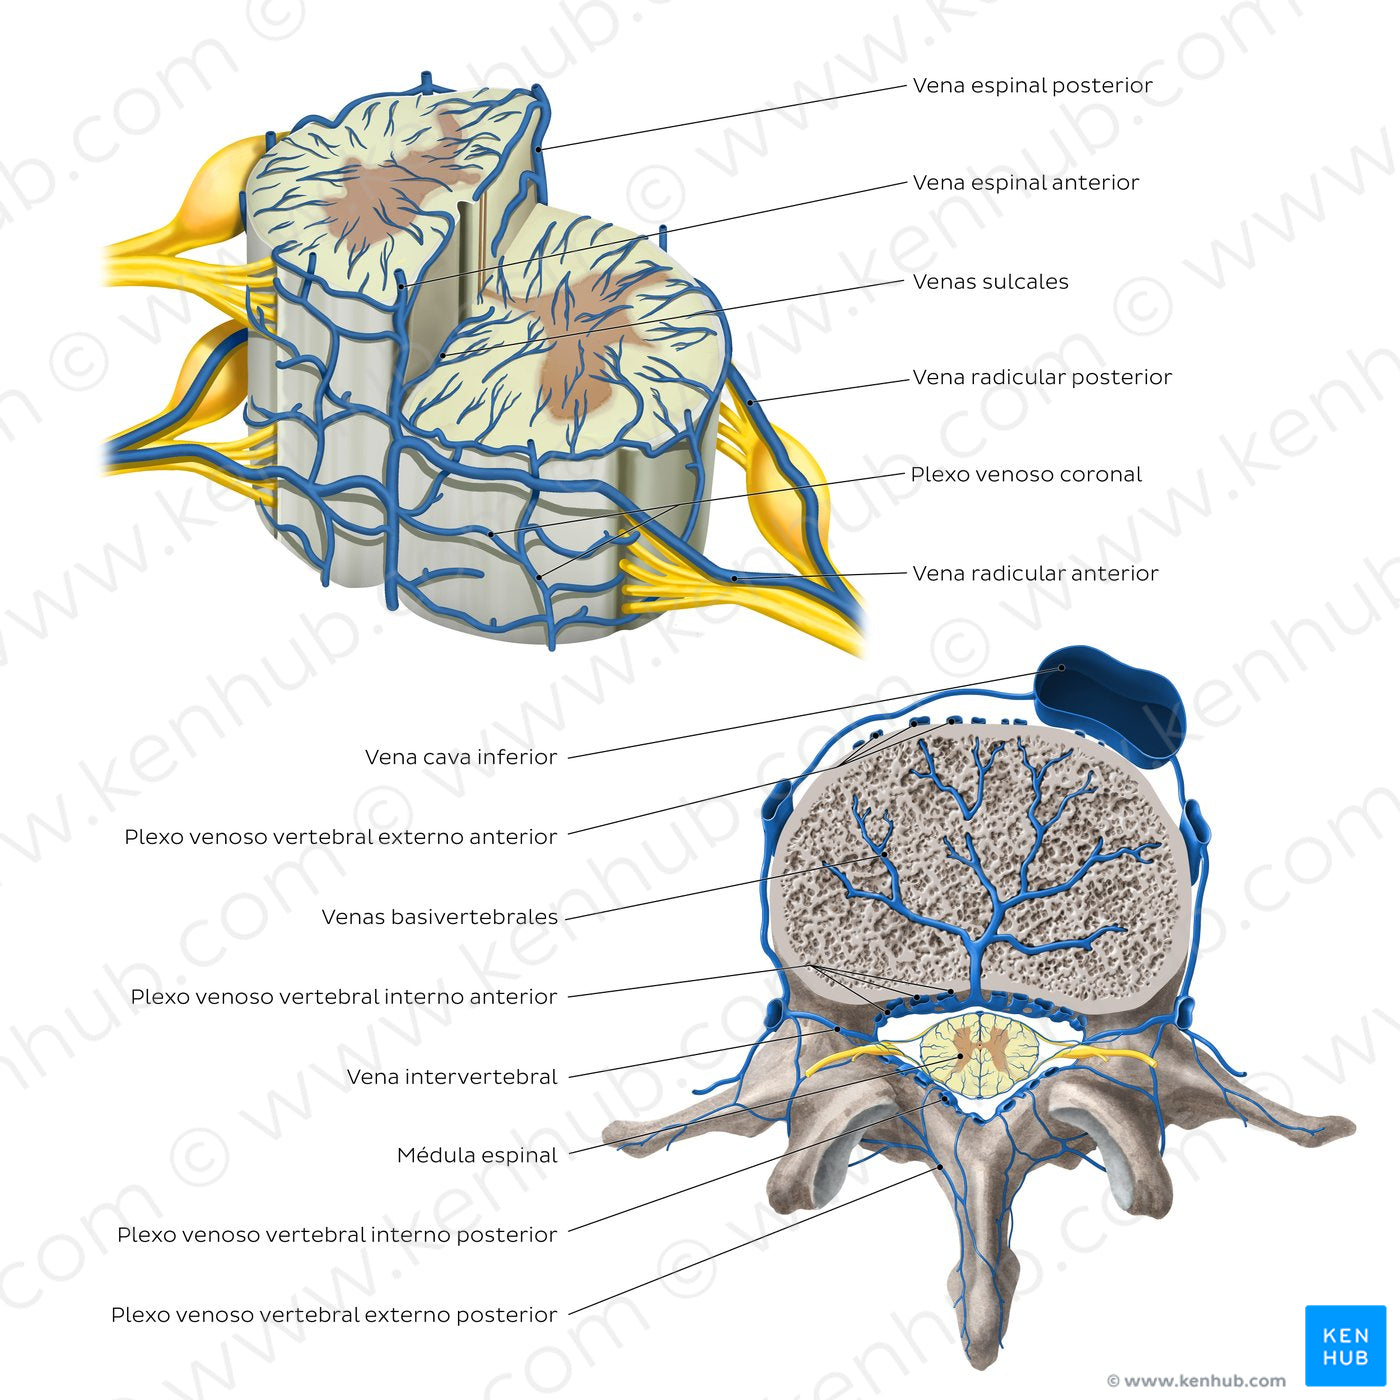 Veins of the spinal cord (Spanish)